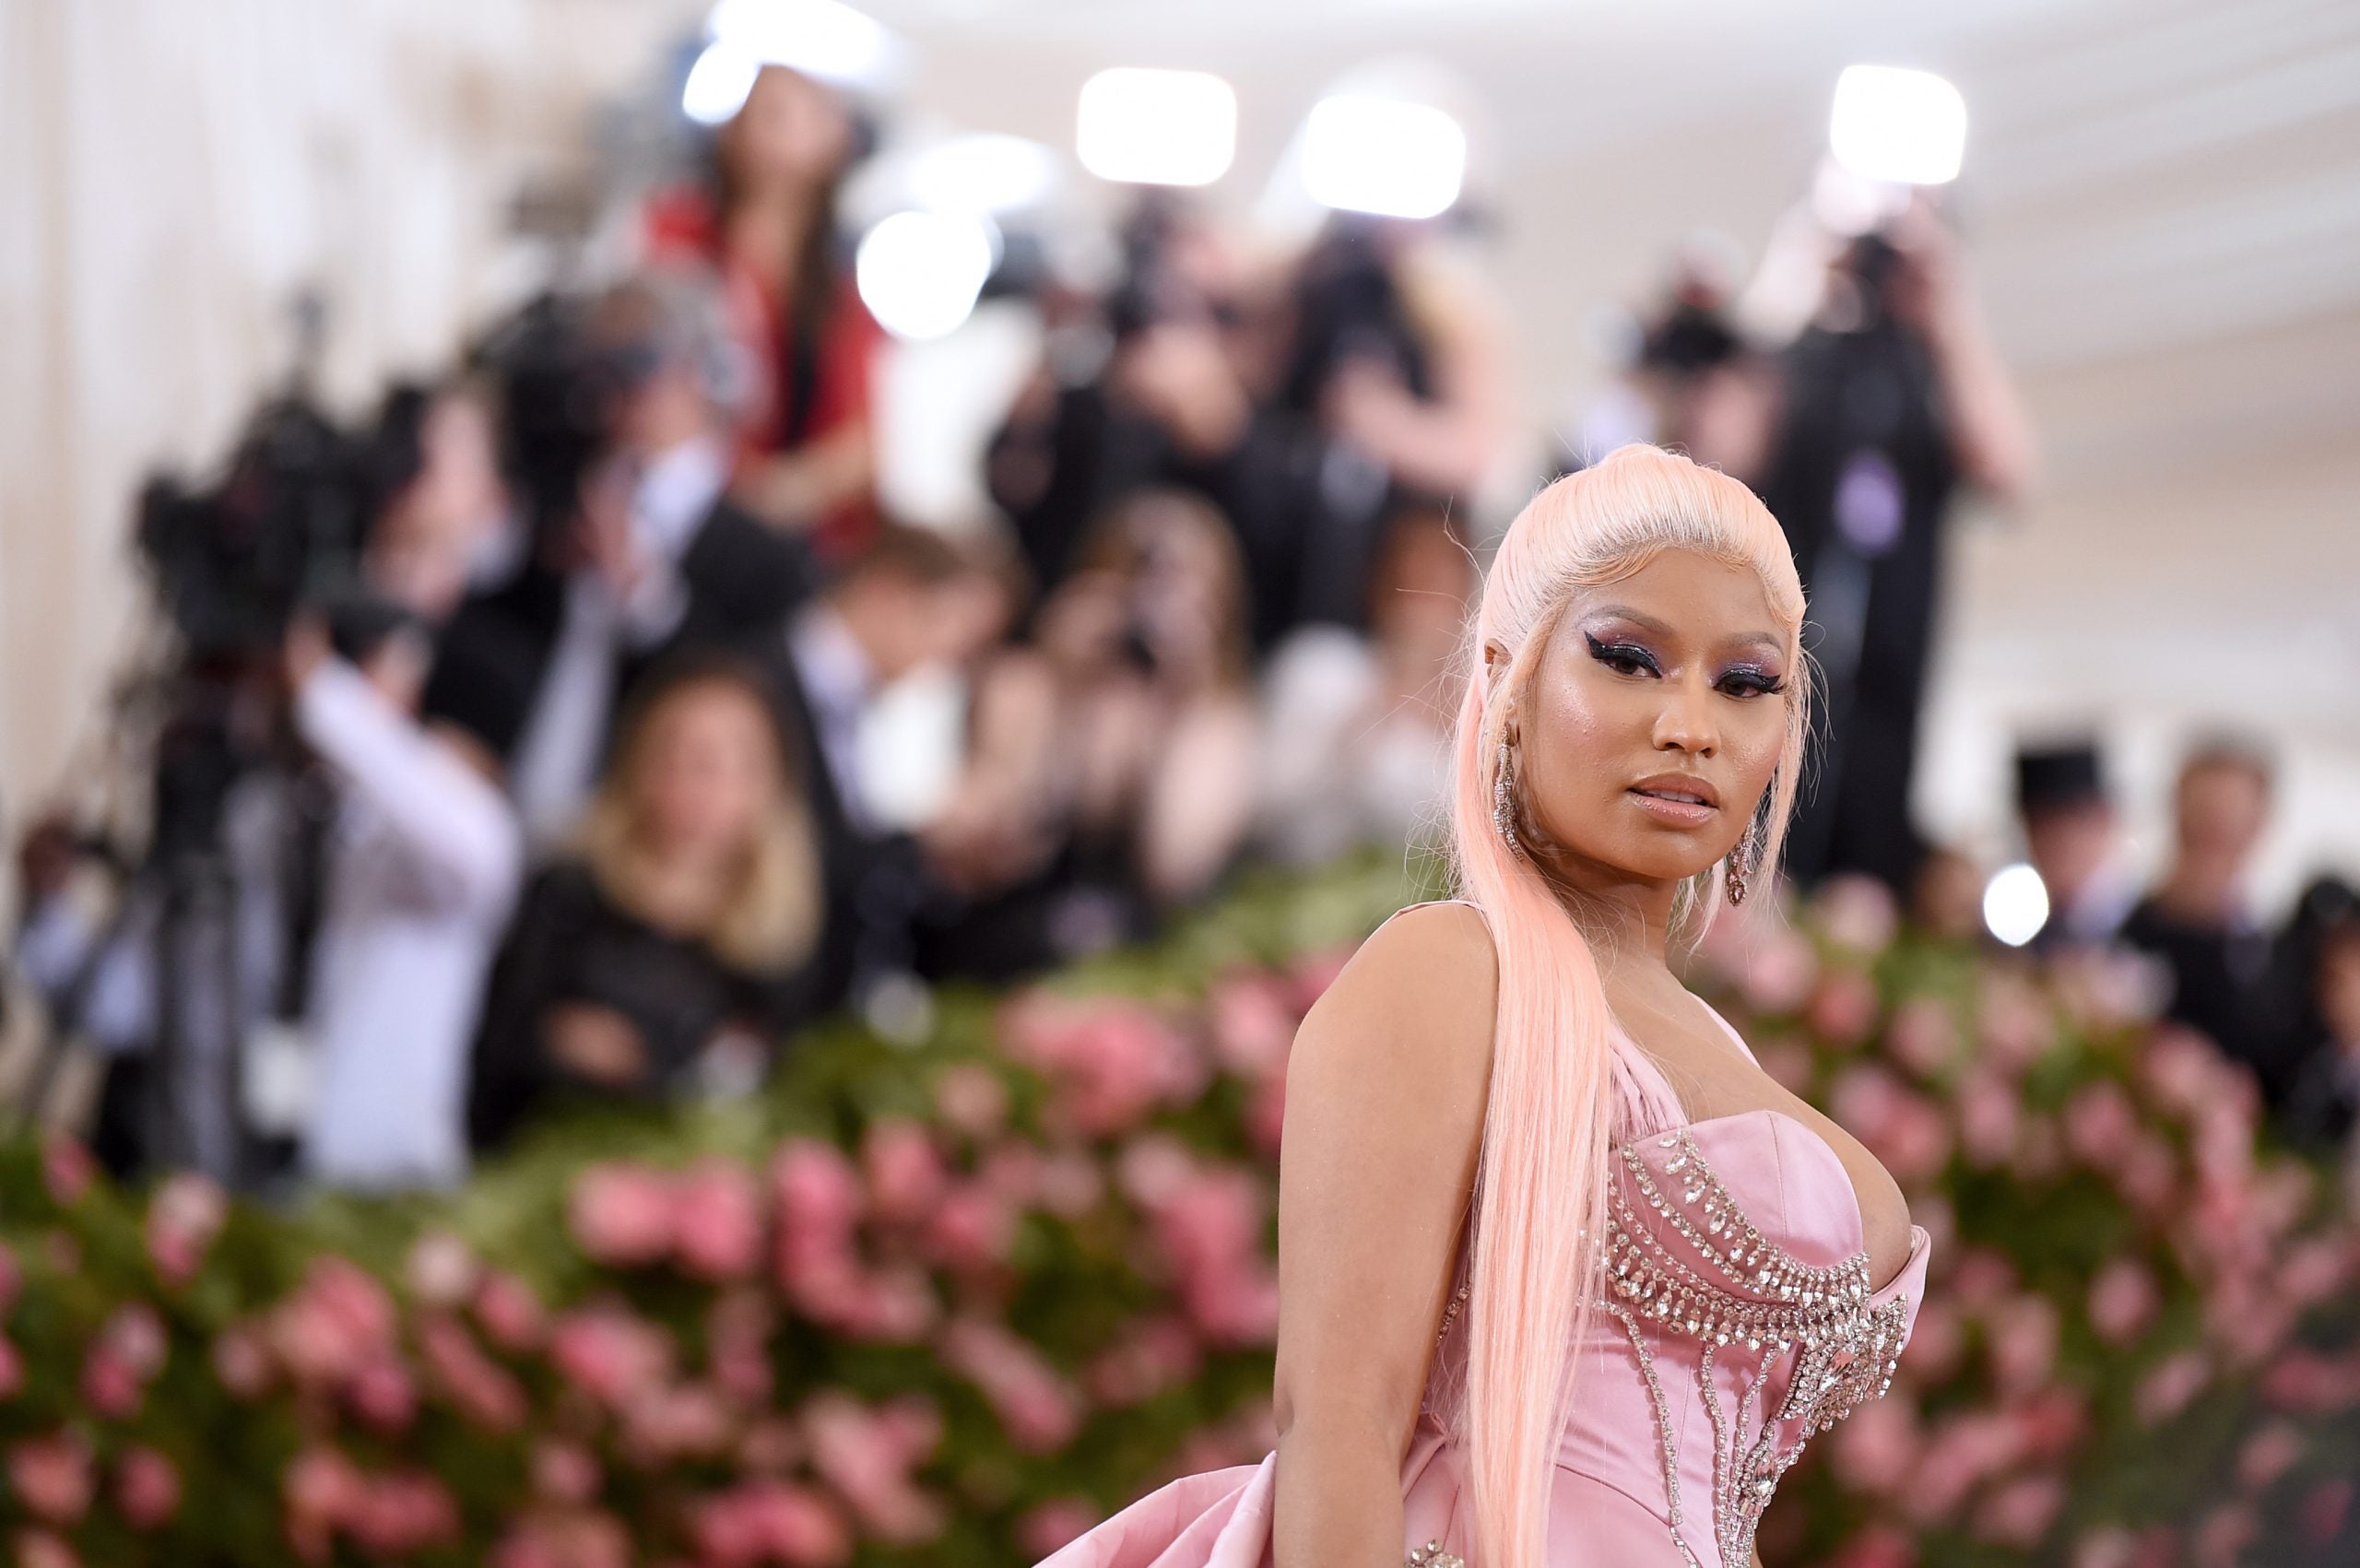 Nicki Minaj Opens Up About How Being ‘Constantly Scrutinized’ In The Public Eye Contributes To Her Anxiety